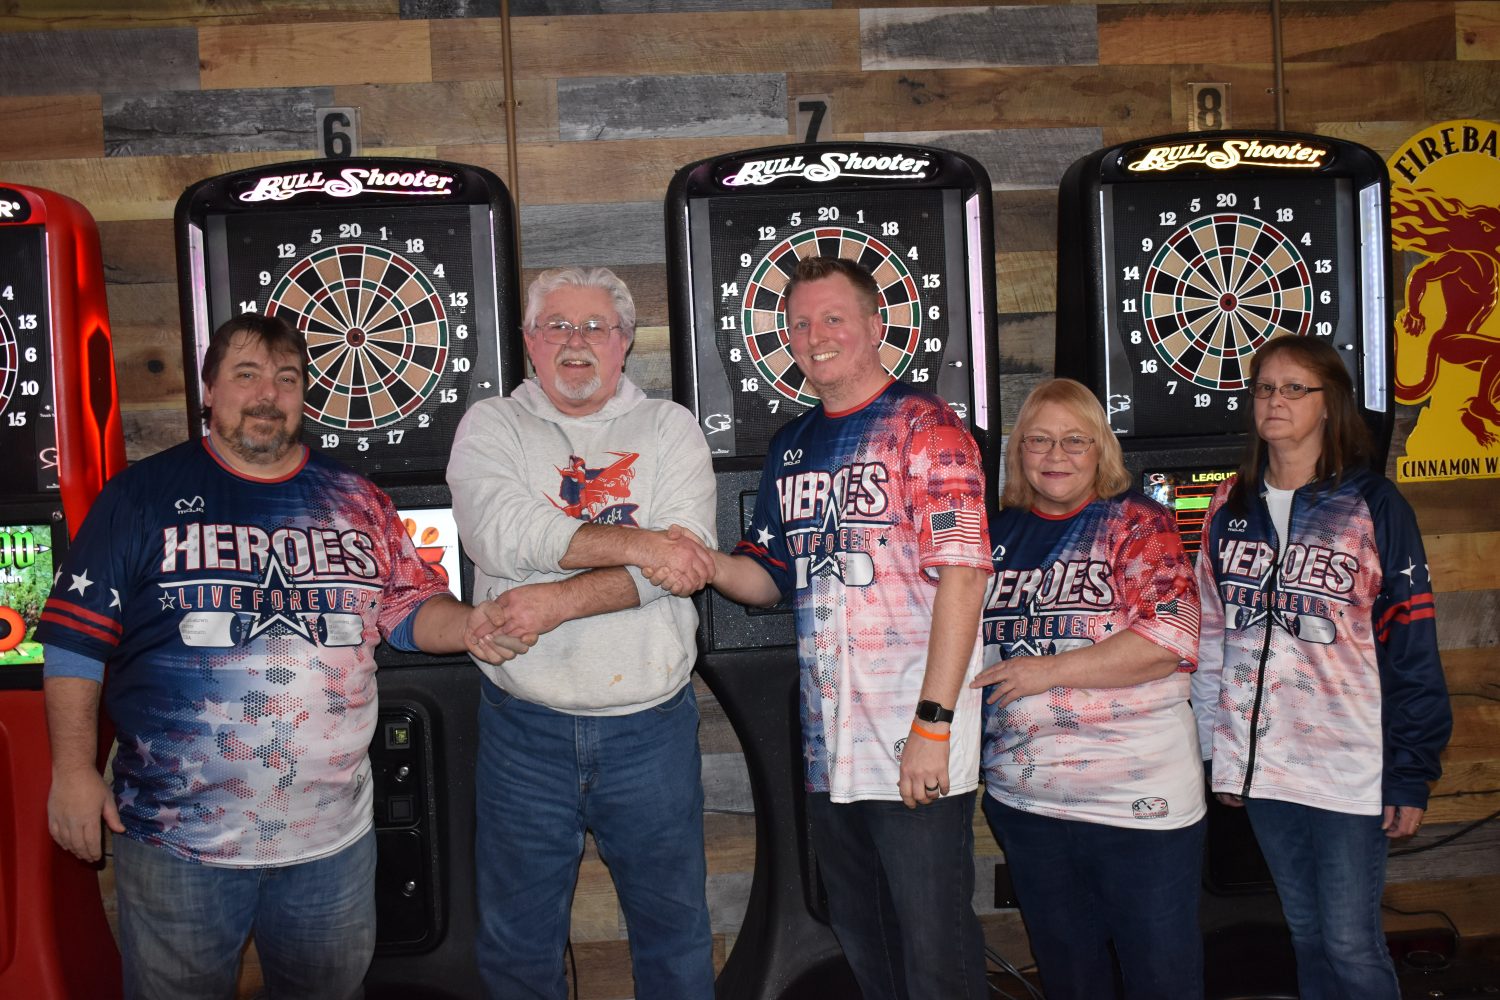 Darts for Vets supports the Never Forgotten Honor Flight